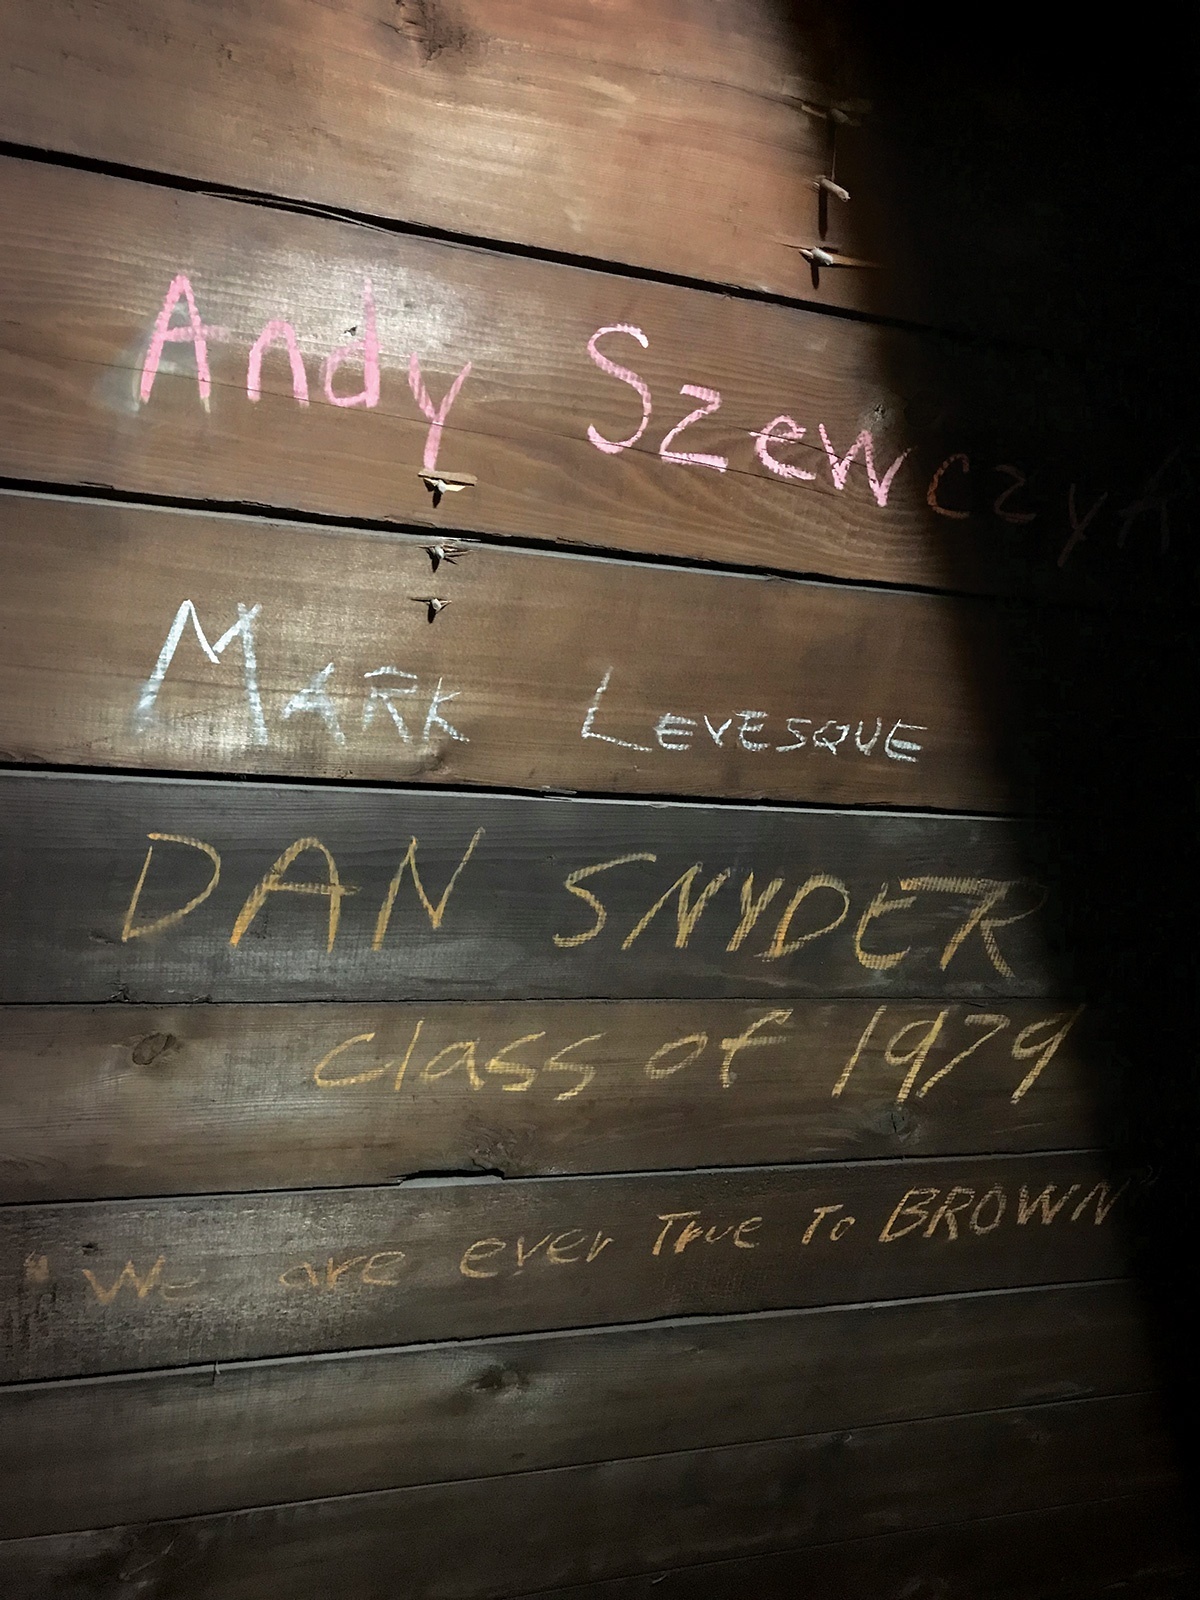 Photo of graffiti on a wooden wall, with the names of several people listed.